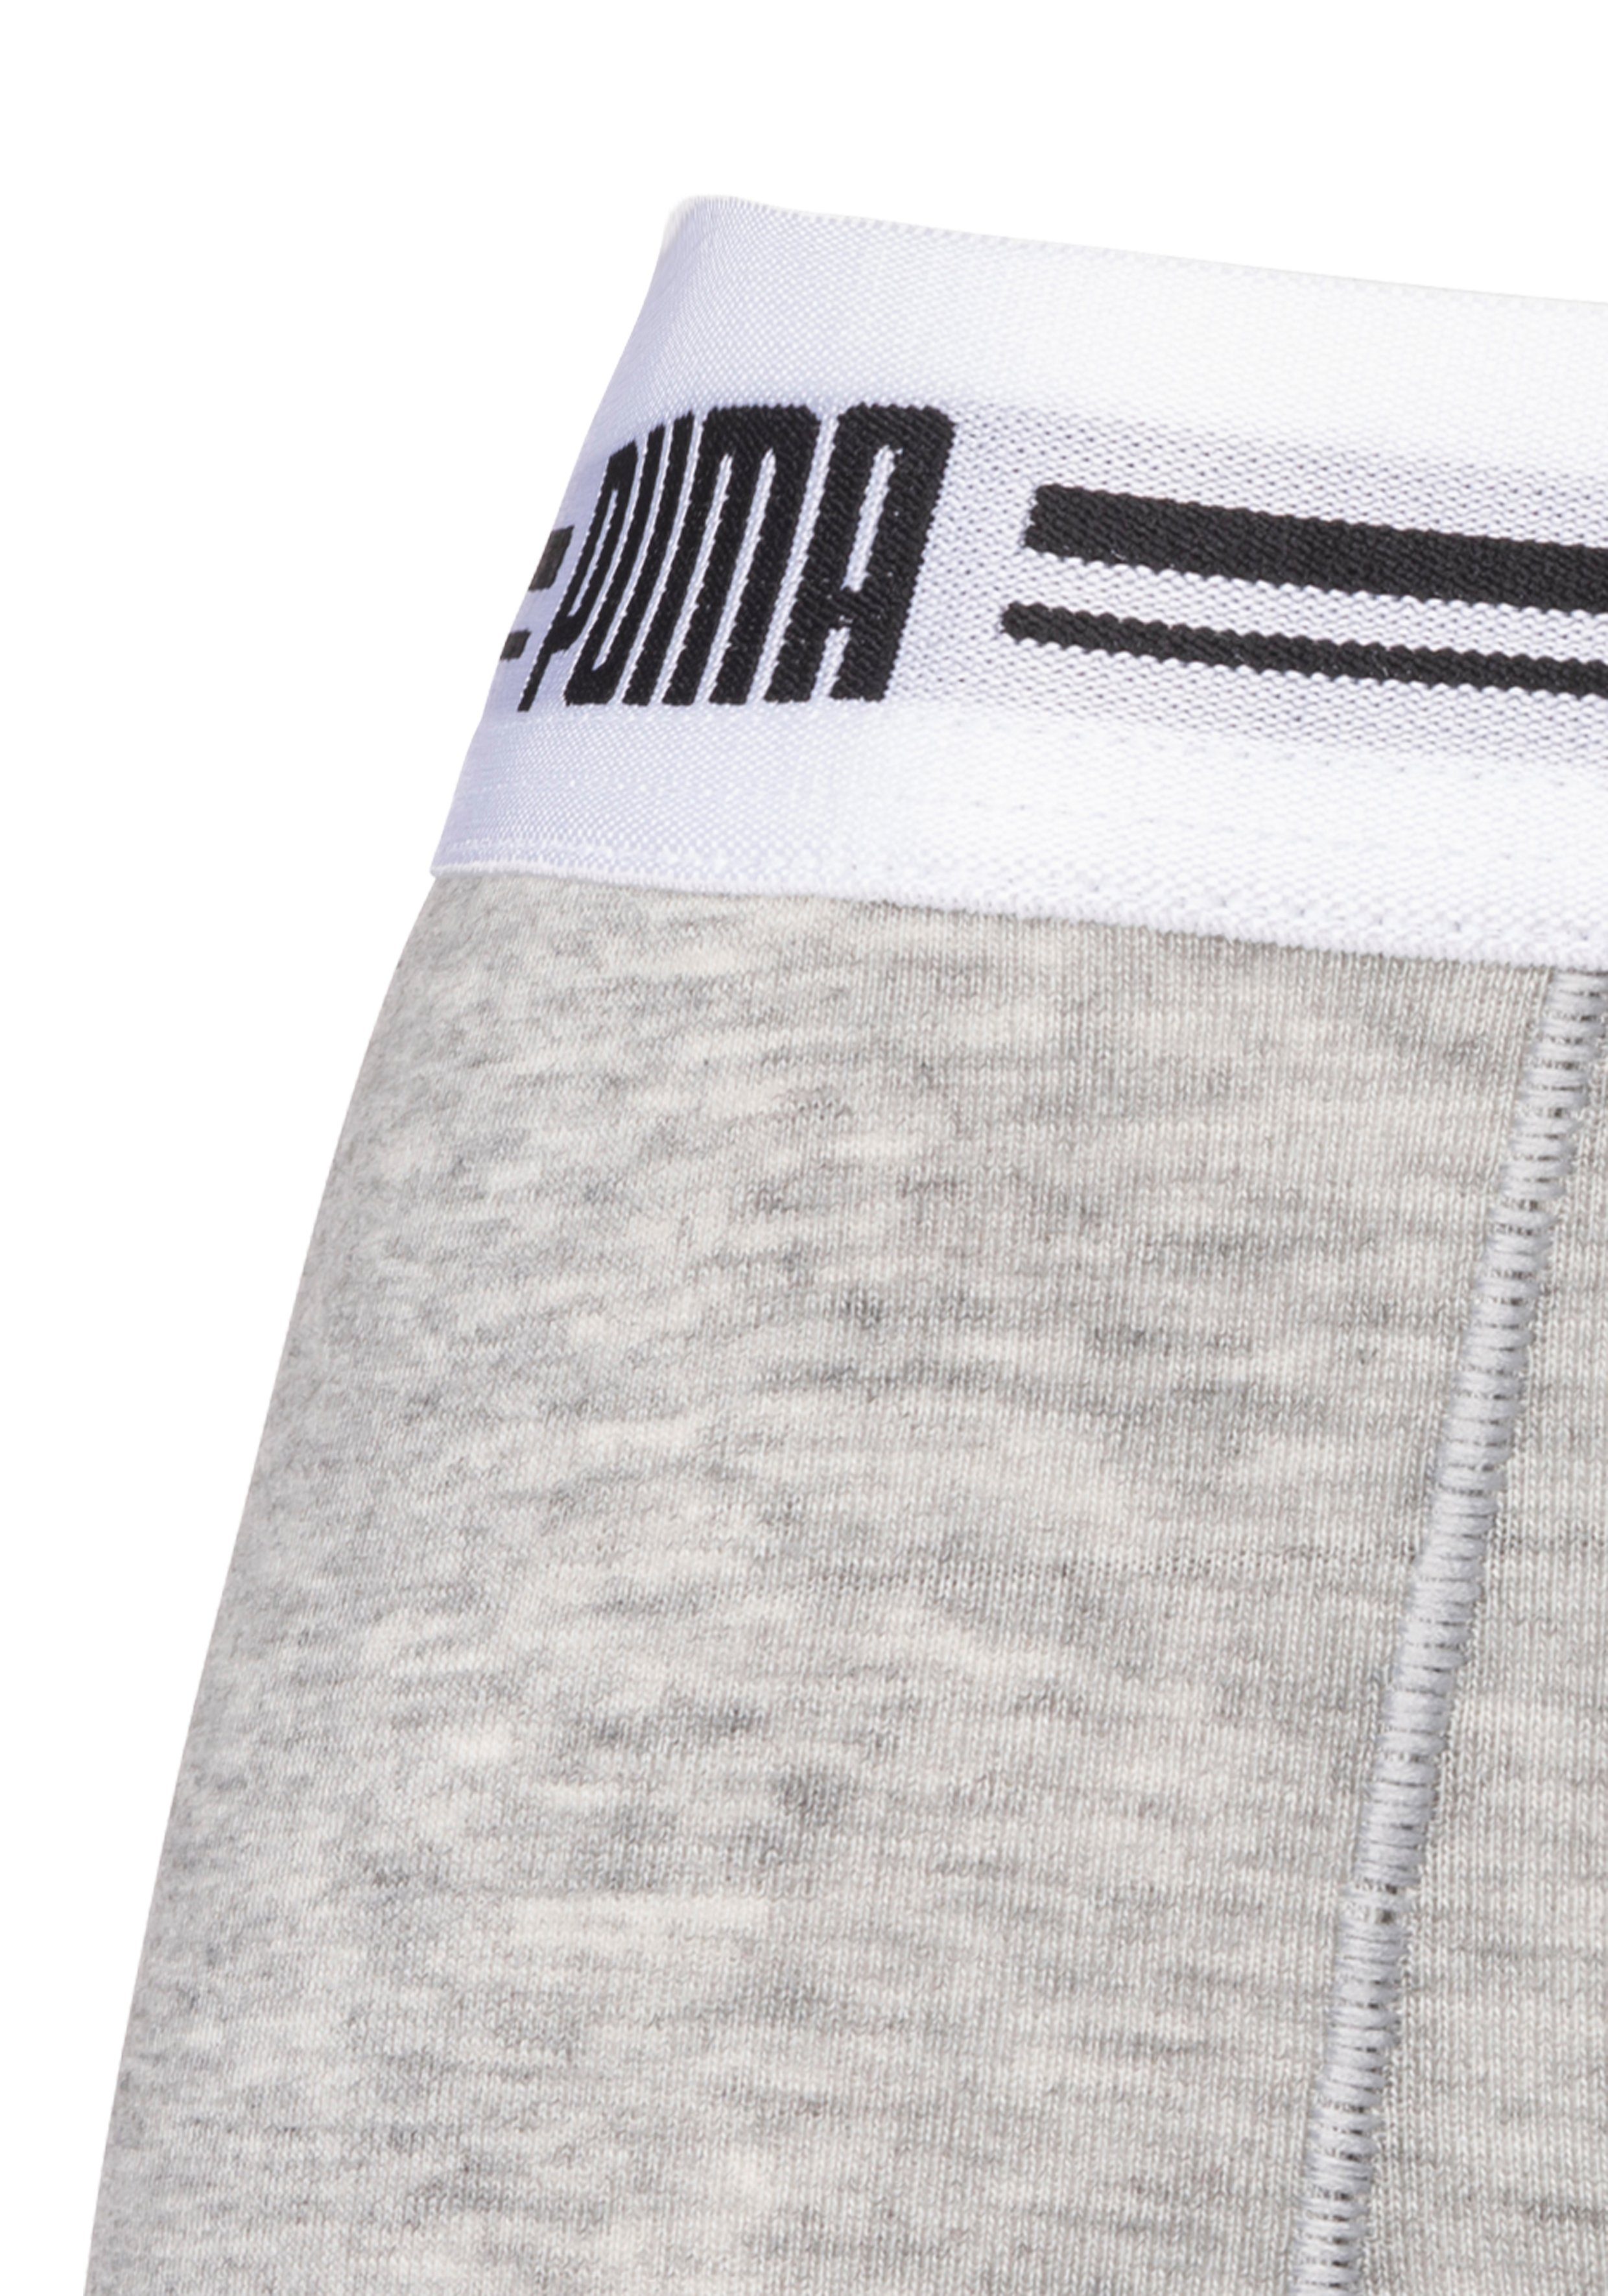 PUMA 2-St) grau-meliert (Packung, Panty Iconic